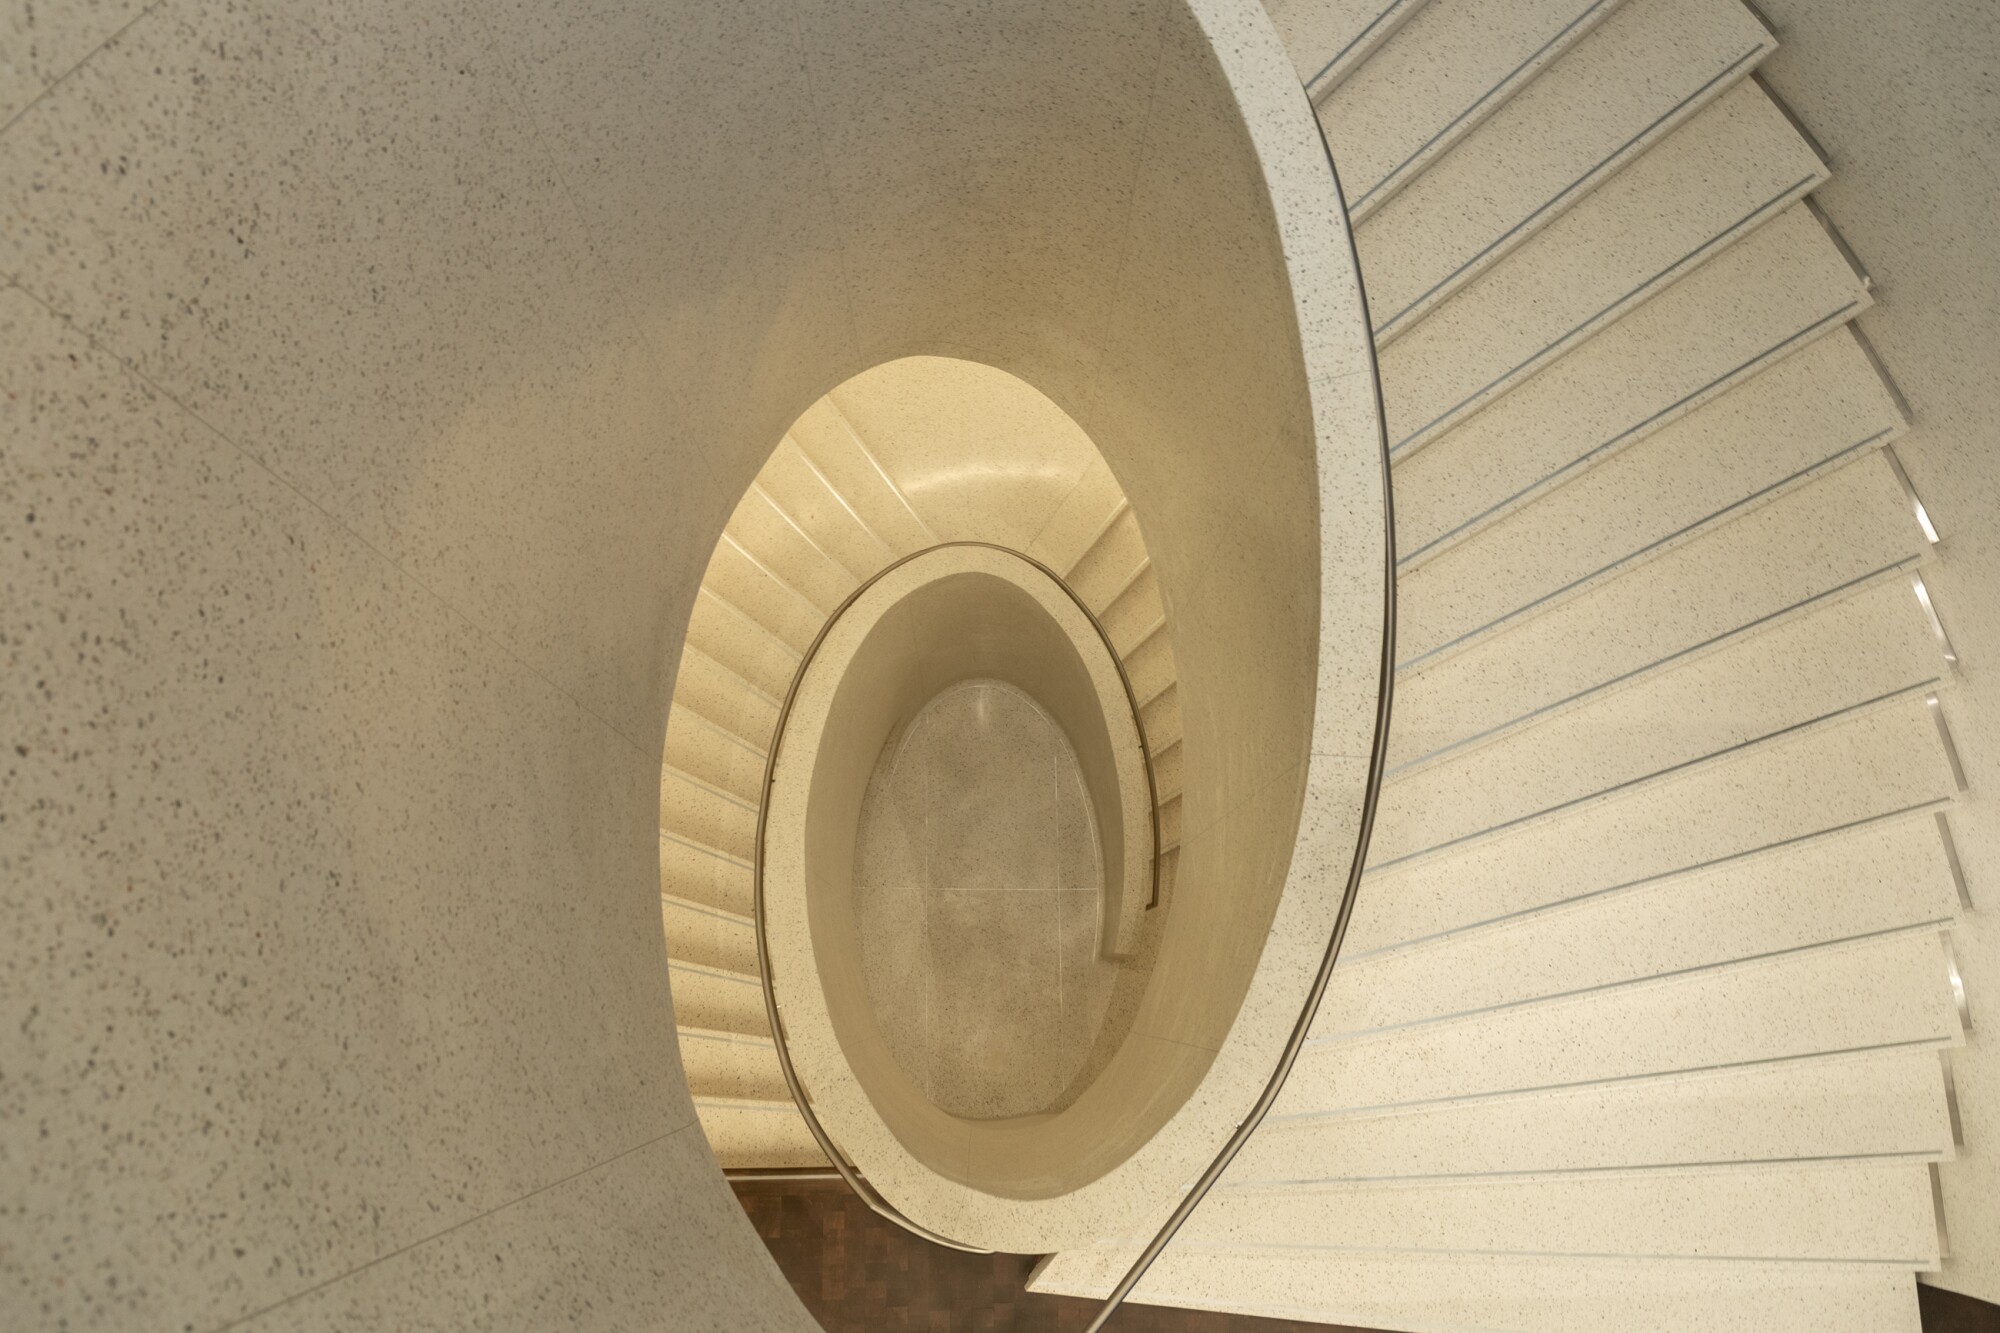 An overhead view shows an oval shaped staircase made from gleaming white terrazzo spiraling downwards